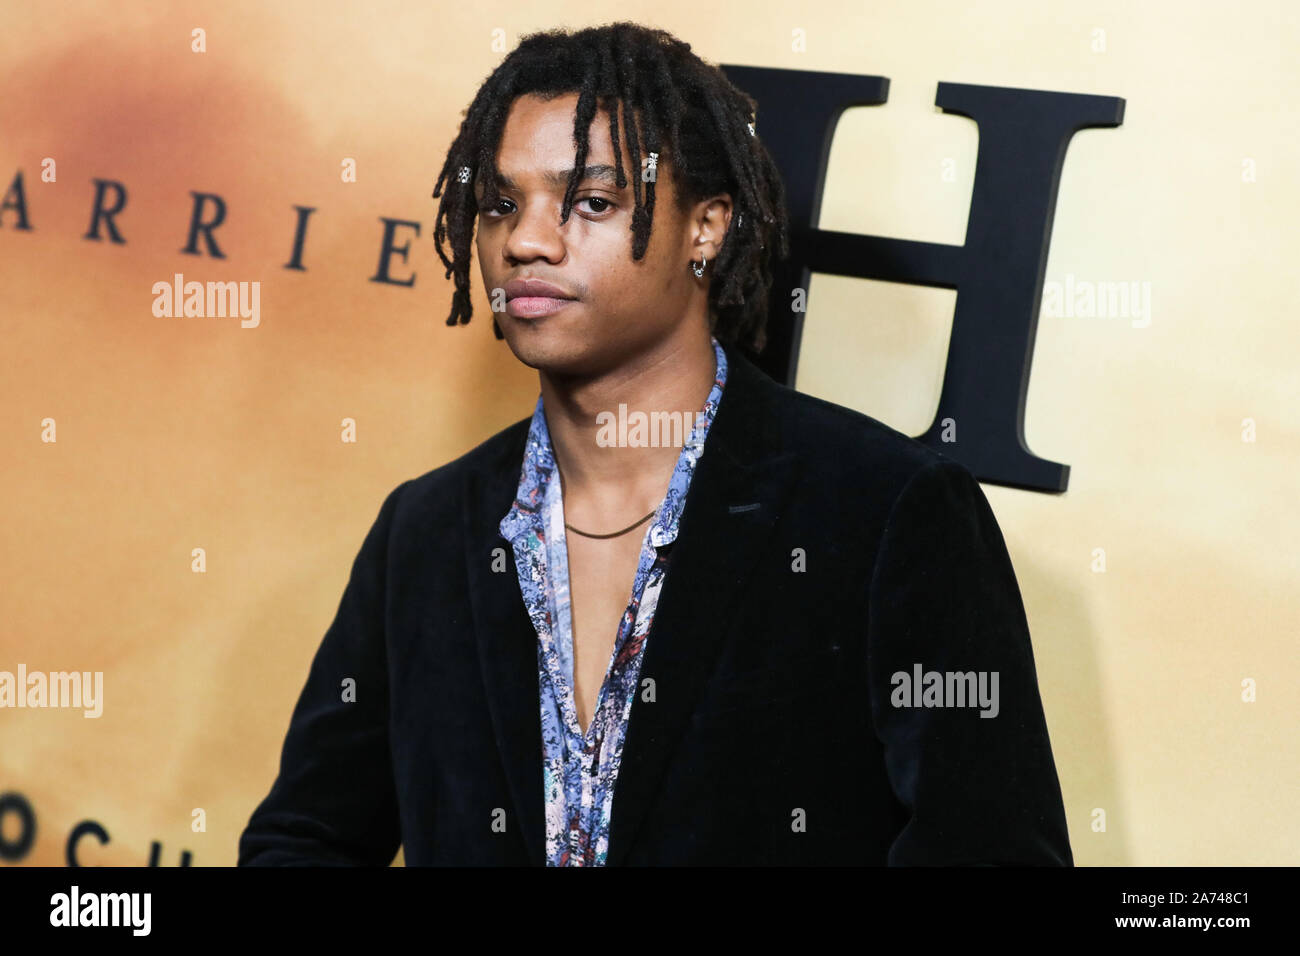 LOS ANGELES, CALIFORNIA, USA - OCTOBER 29: Henry Hunter Hall arrives at the Los Angeles Premiere Of Focus Features' 'Harriet' held at The Orpheum Theatre on October 29, 2019 in Los Angeles, California, United States. (Photo by Xavier Collin/Image Press Agency) Stock Photo